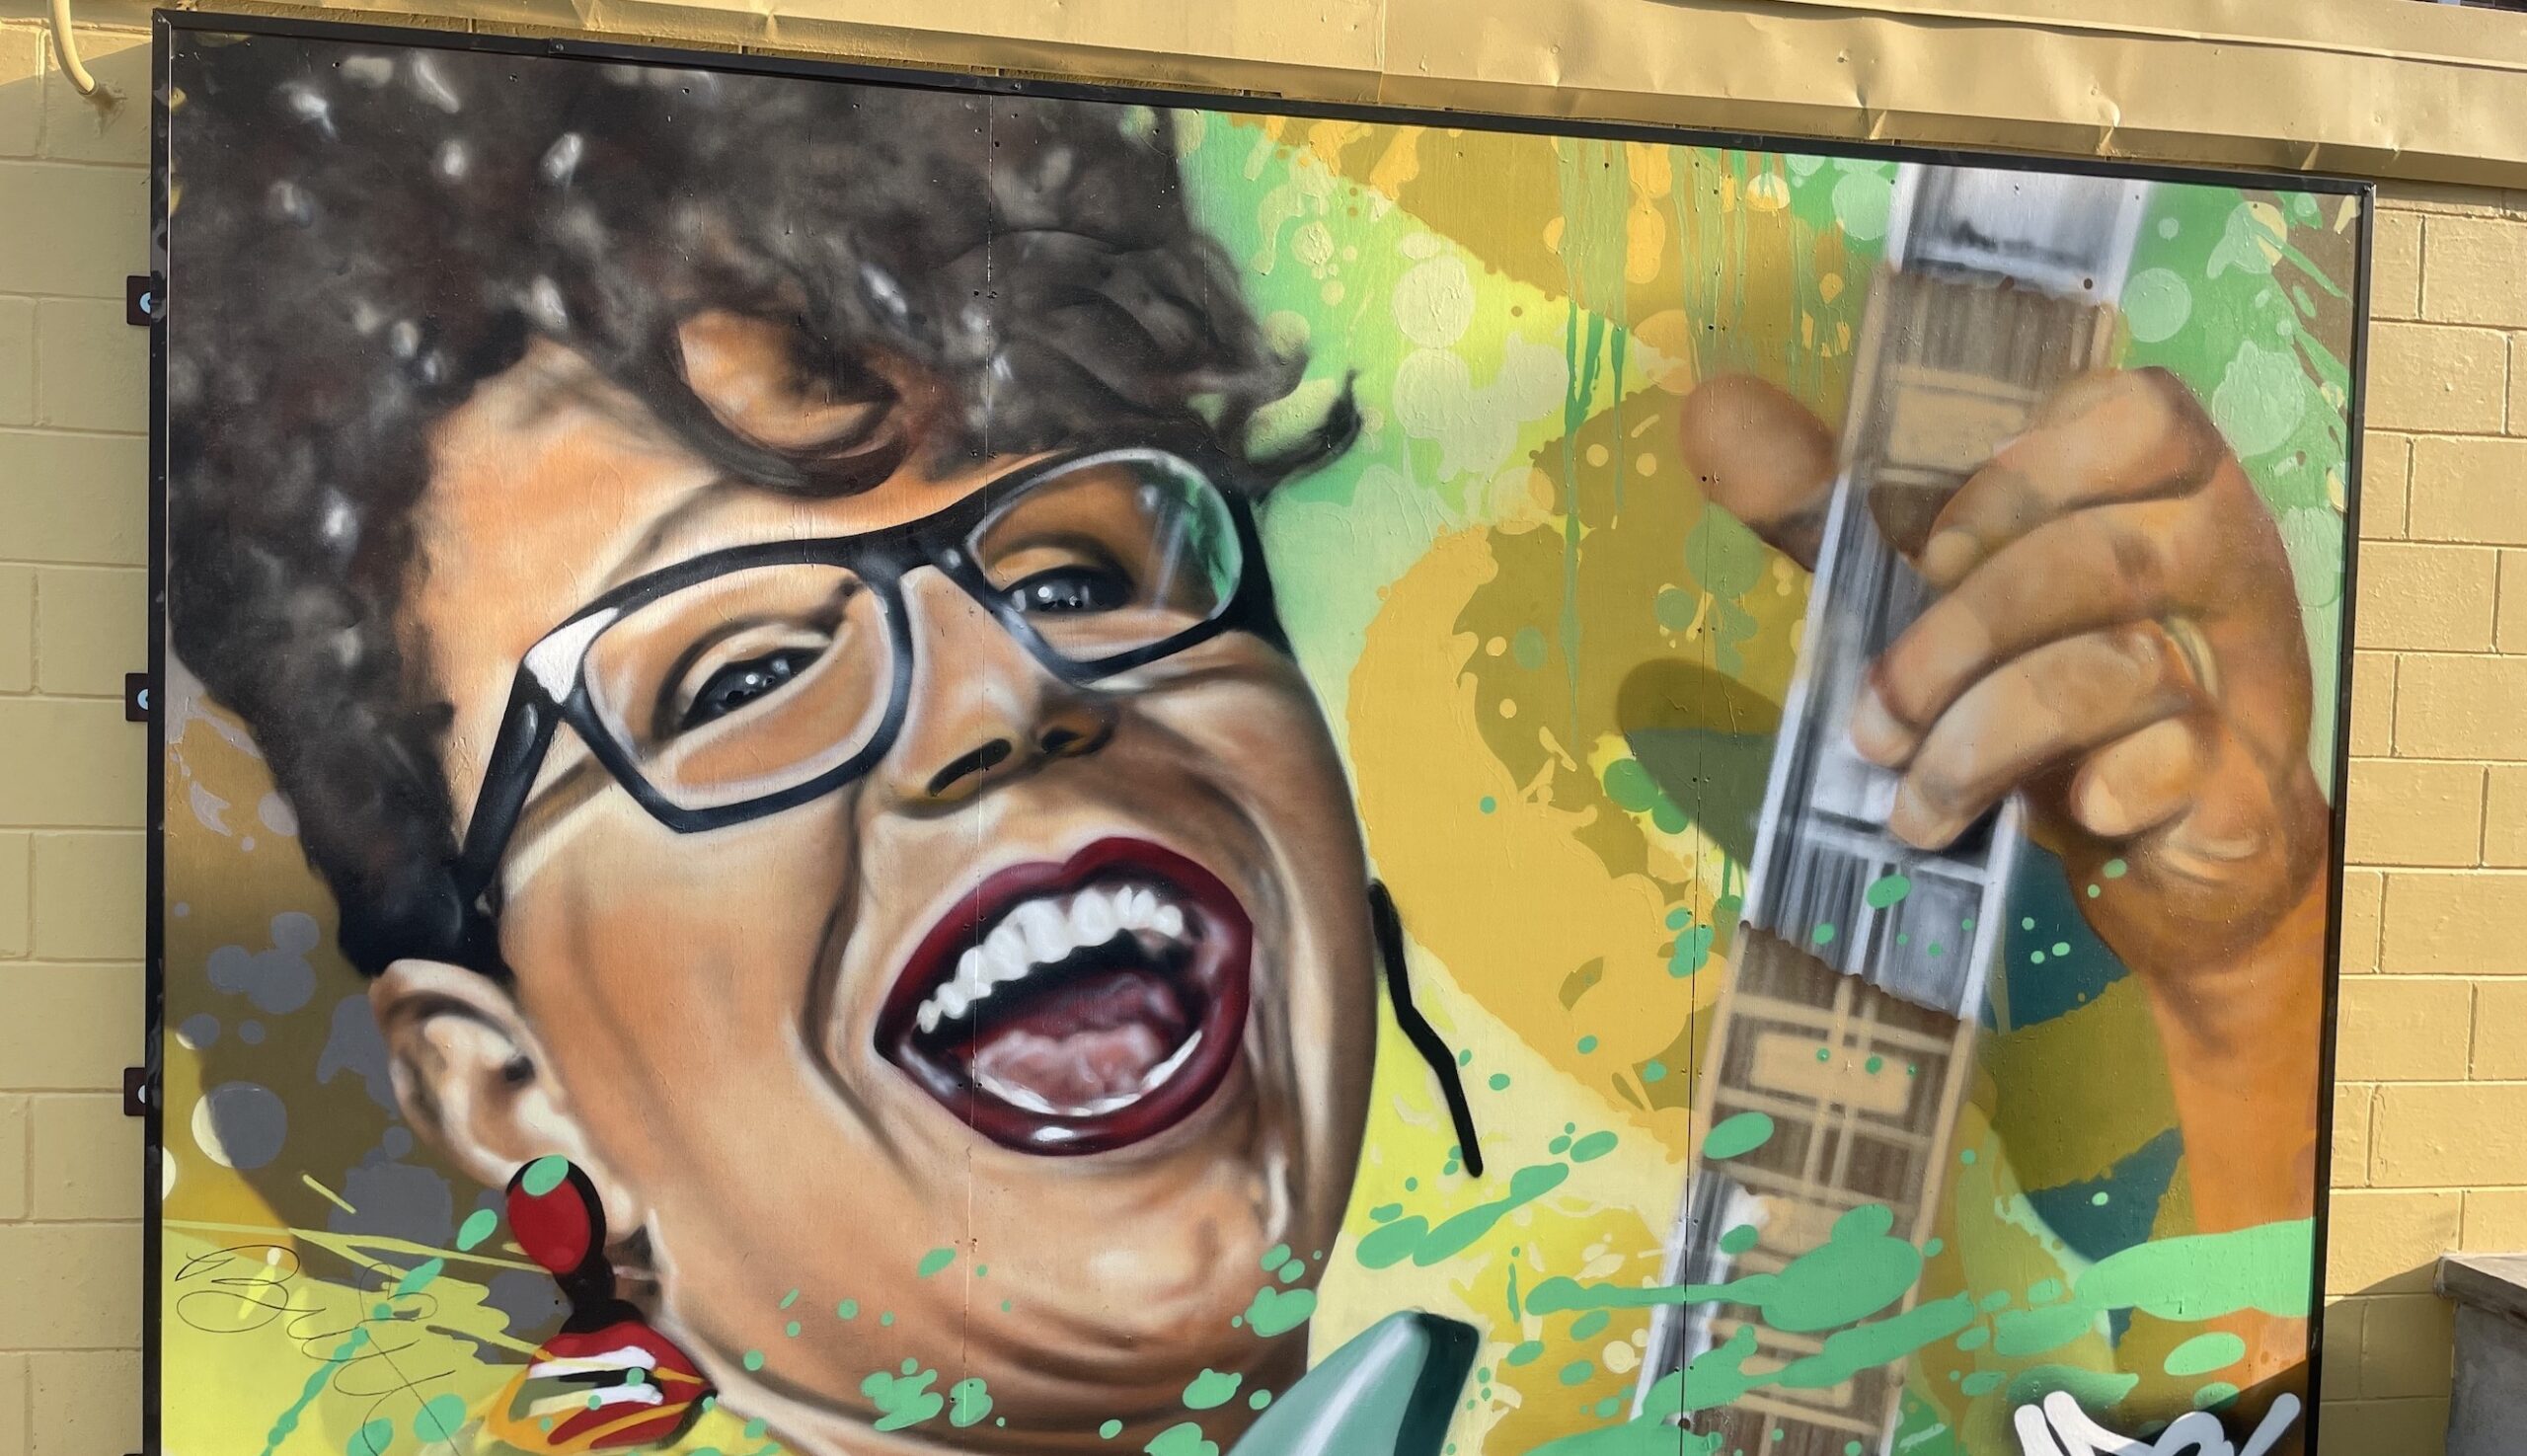 A colorful mural of Brittany Howard from Alabama Shakes